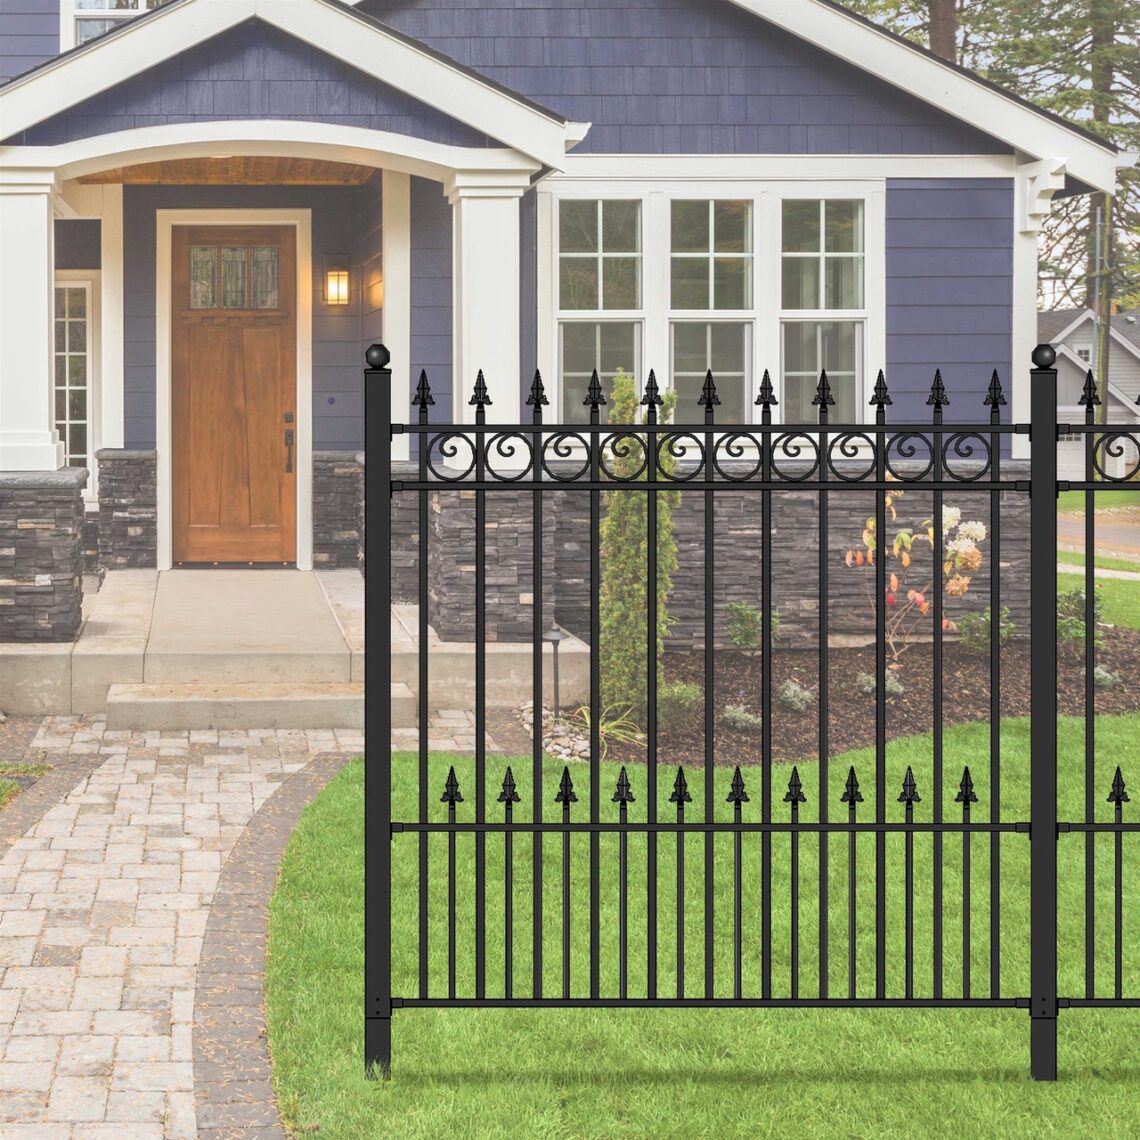 How Much Fence Do I Need For My Home?